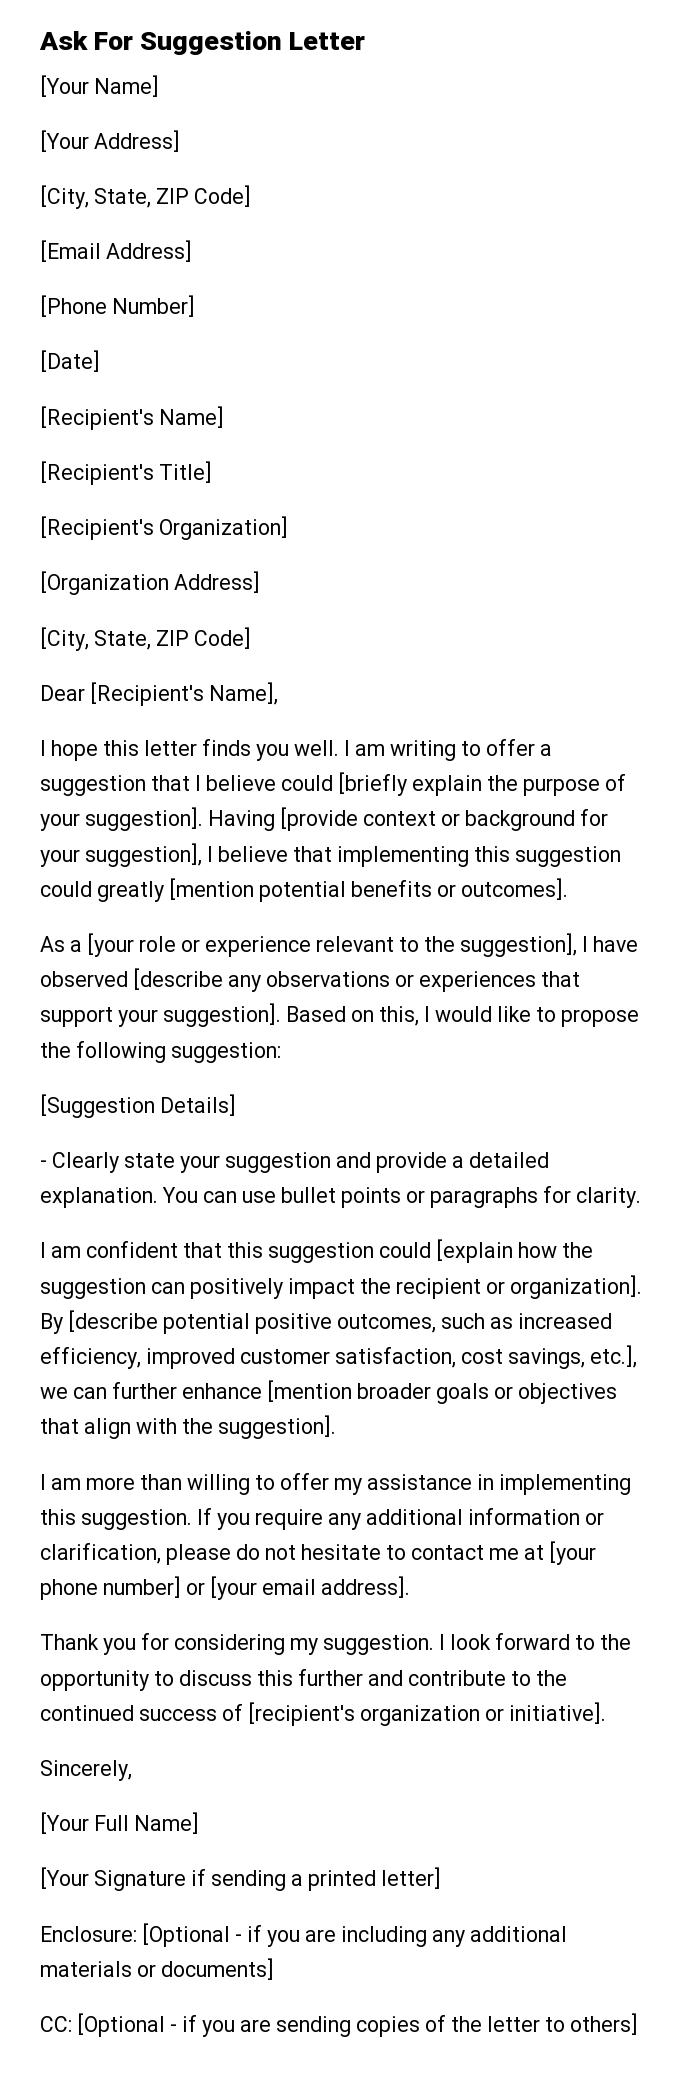 Ask For Suggestion Letter